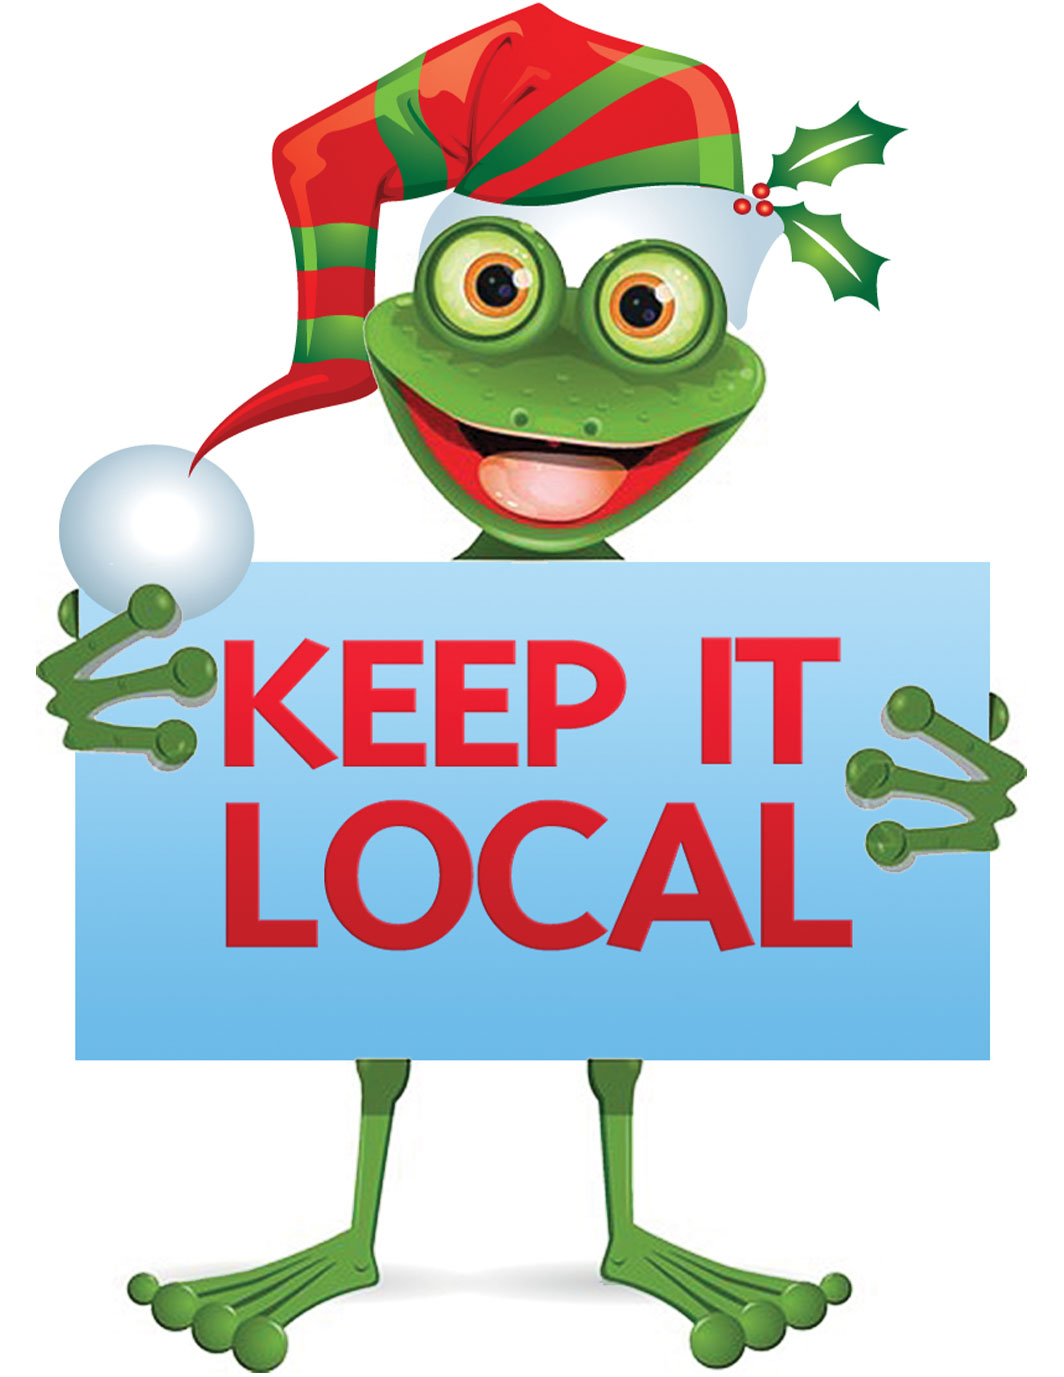 Hopper the Shopper invites you to shop local this holiday season.